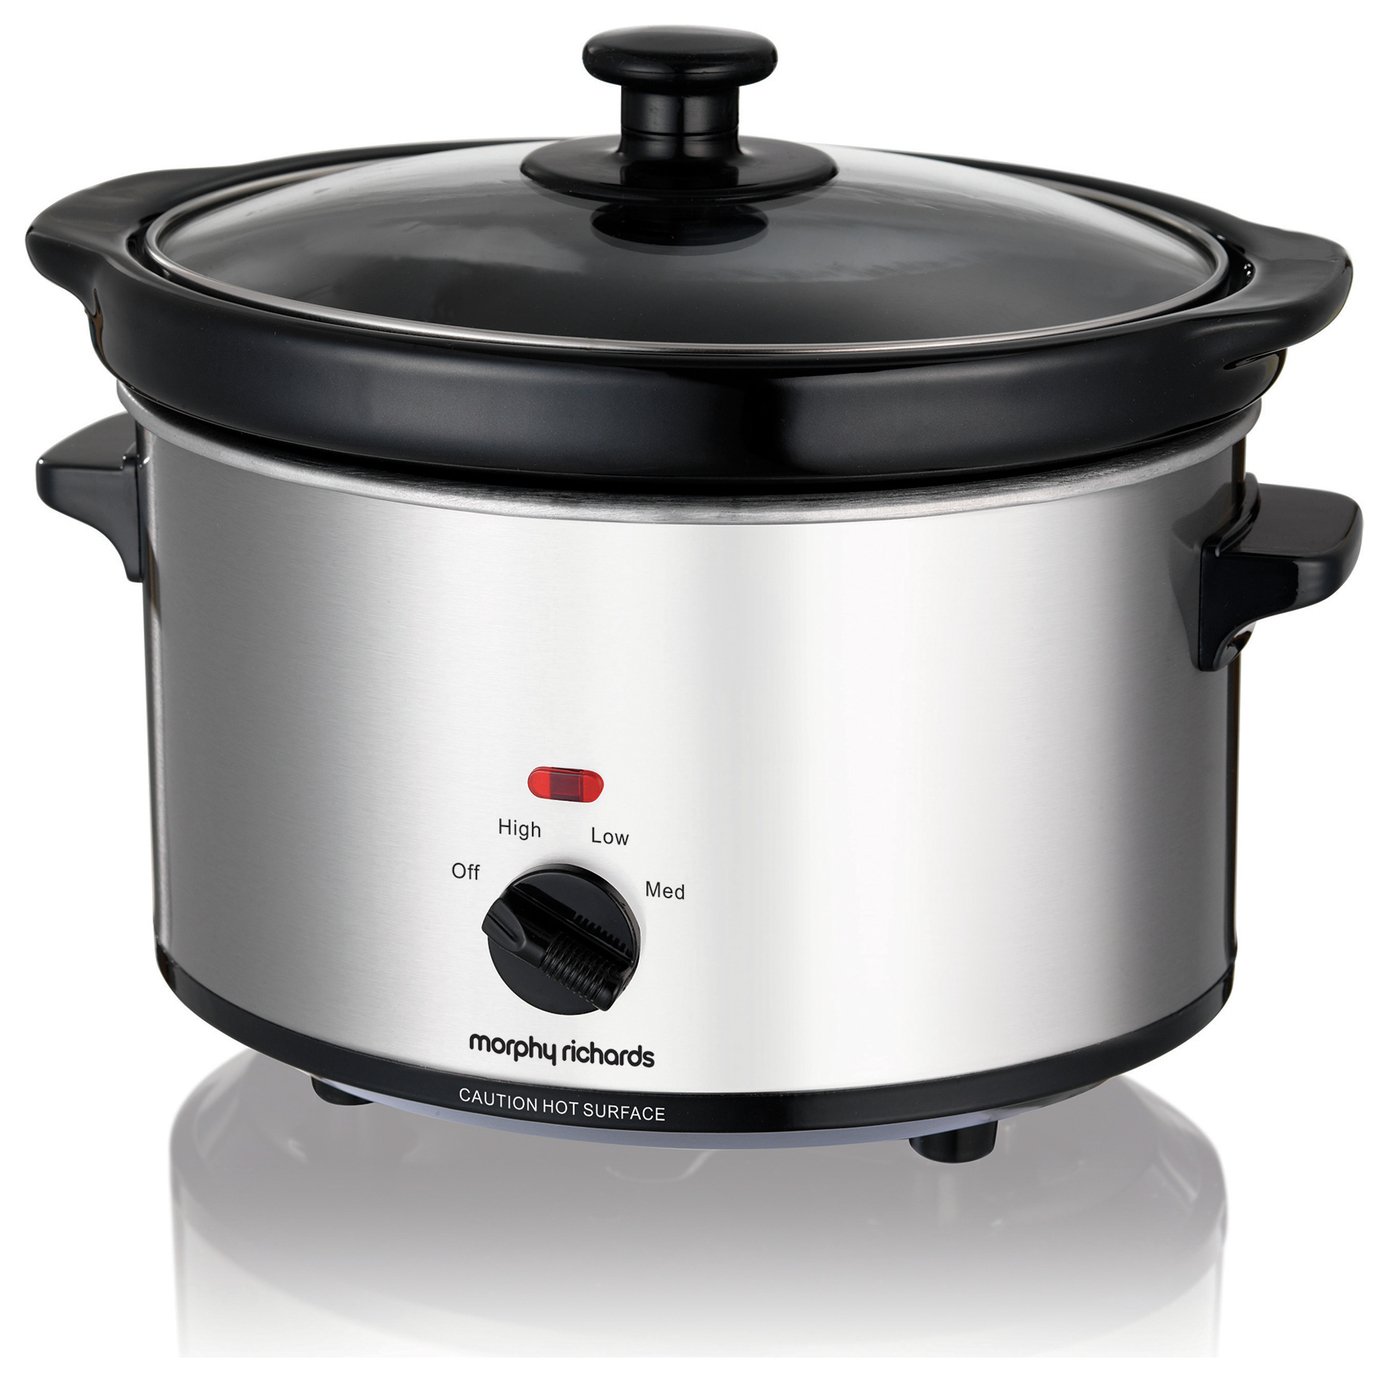 'Morphy Richards 460251 2.5l Slow Cooker - Stainless Steel